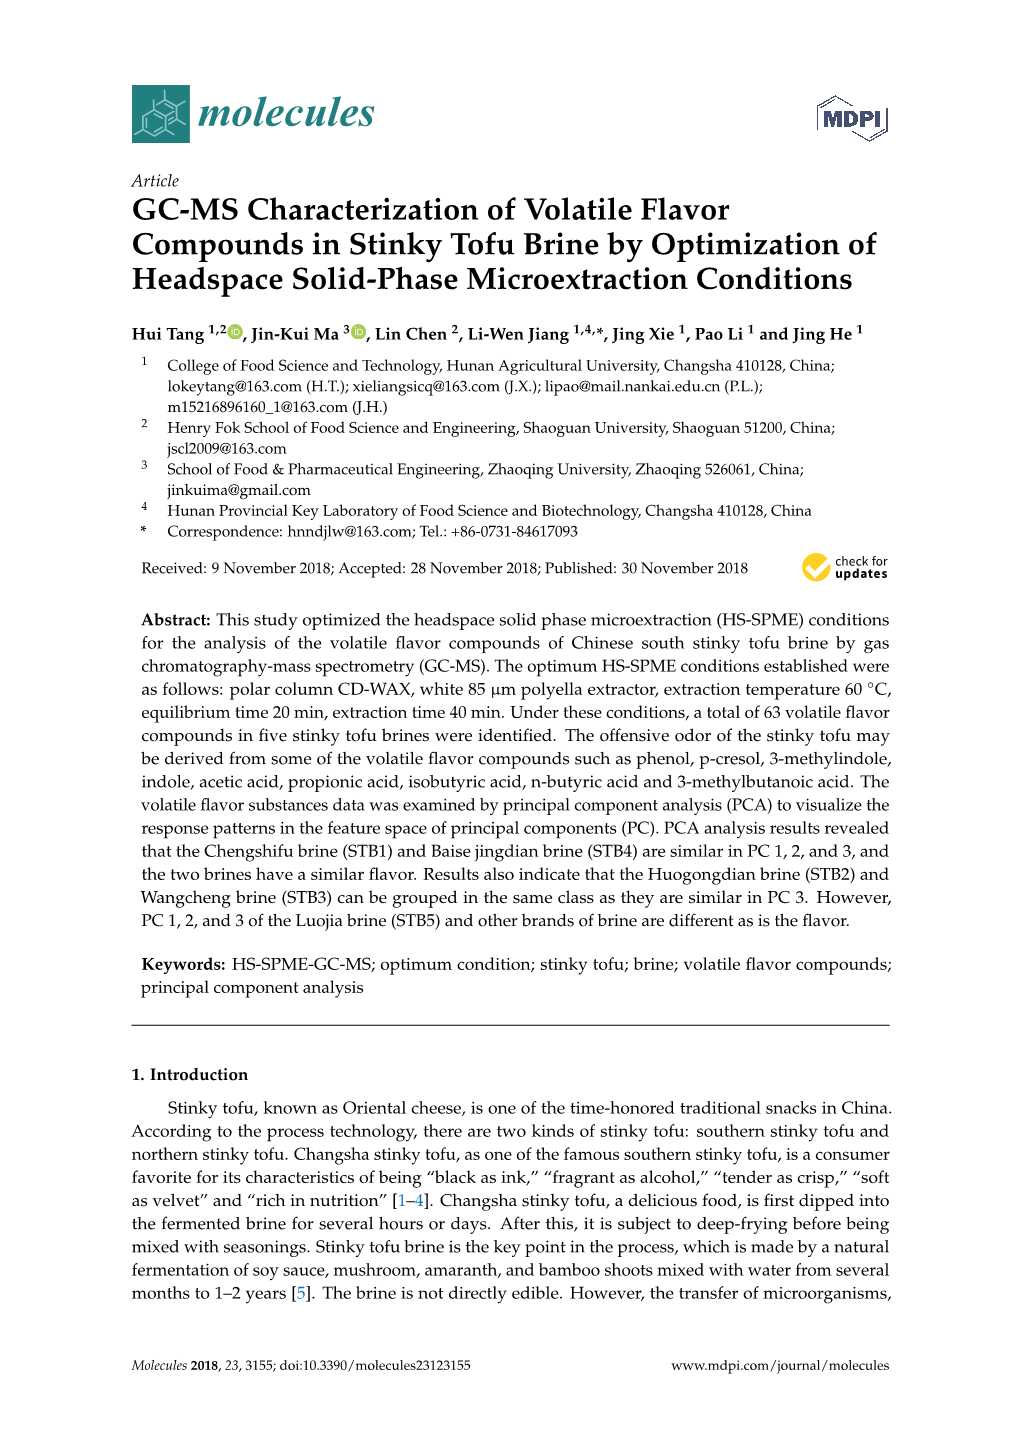 GC-MS Characterization of Volatile Flavor Compounds in Stinky Tofu Brine by Optimization of Headspace Solid-Phase Microextraction Conditions